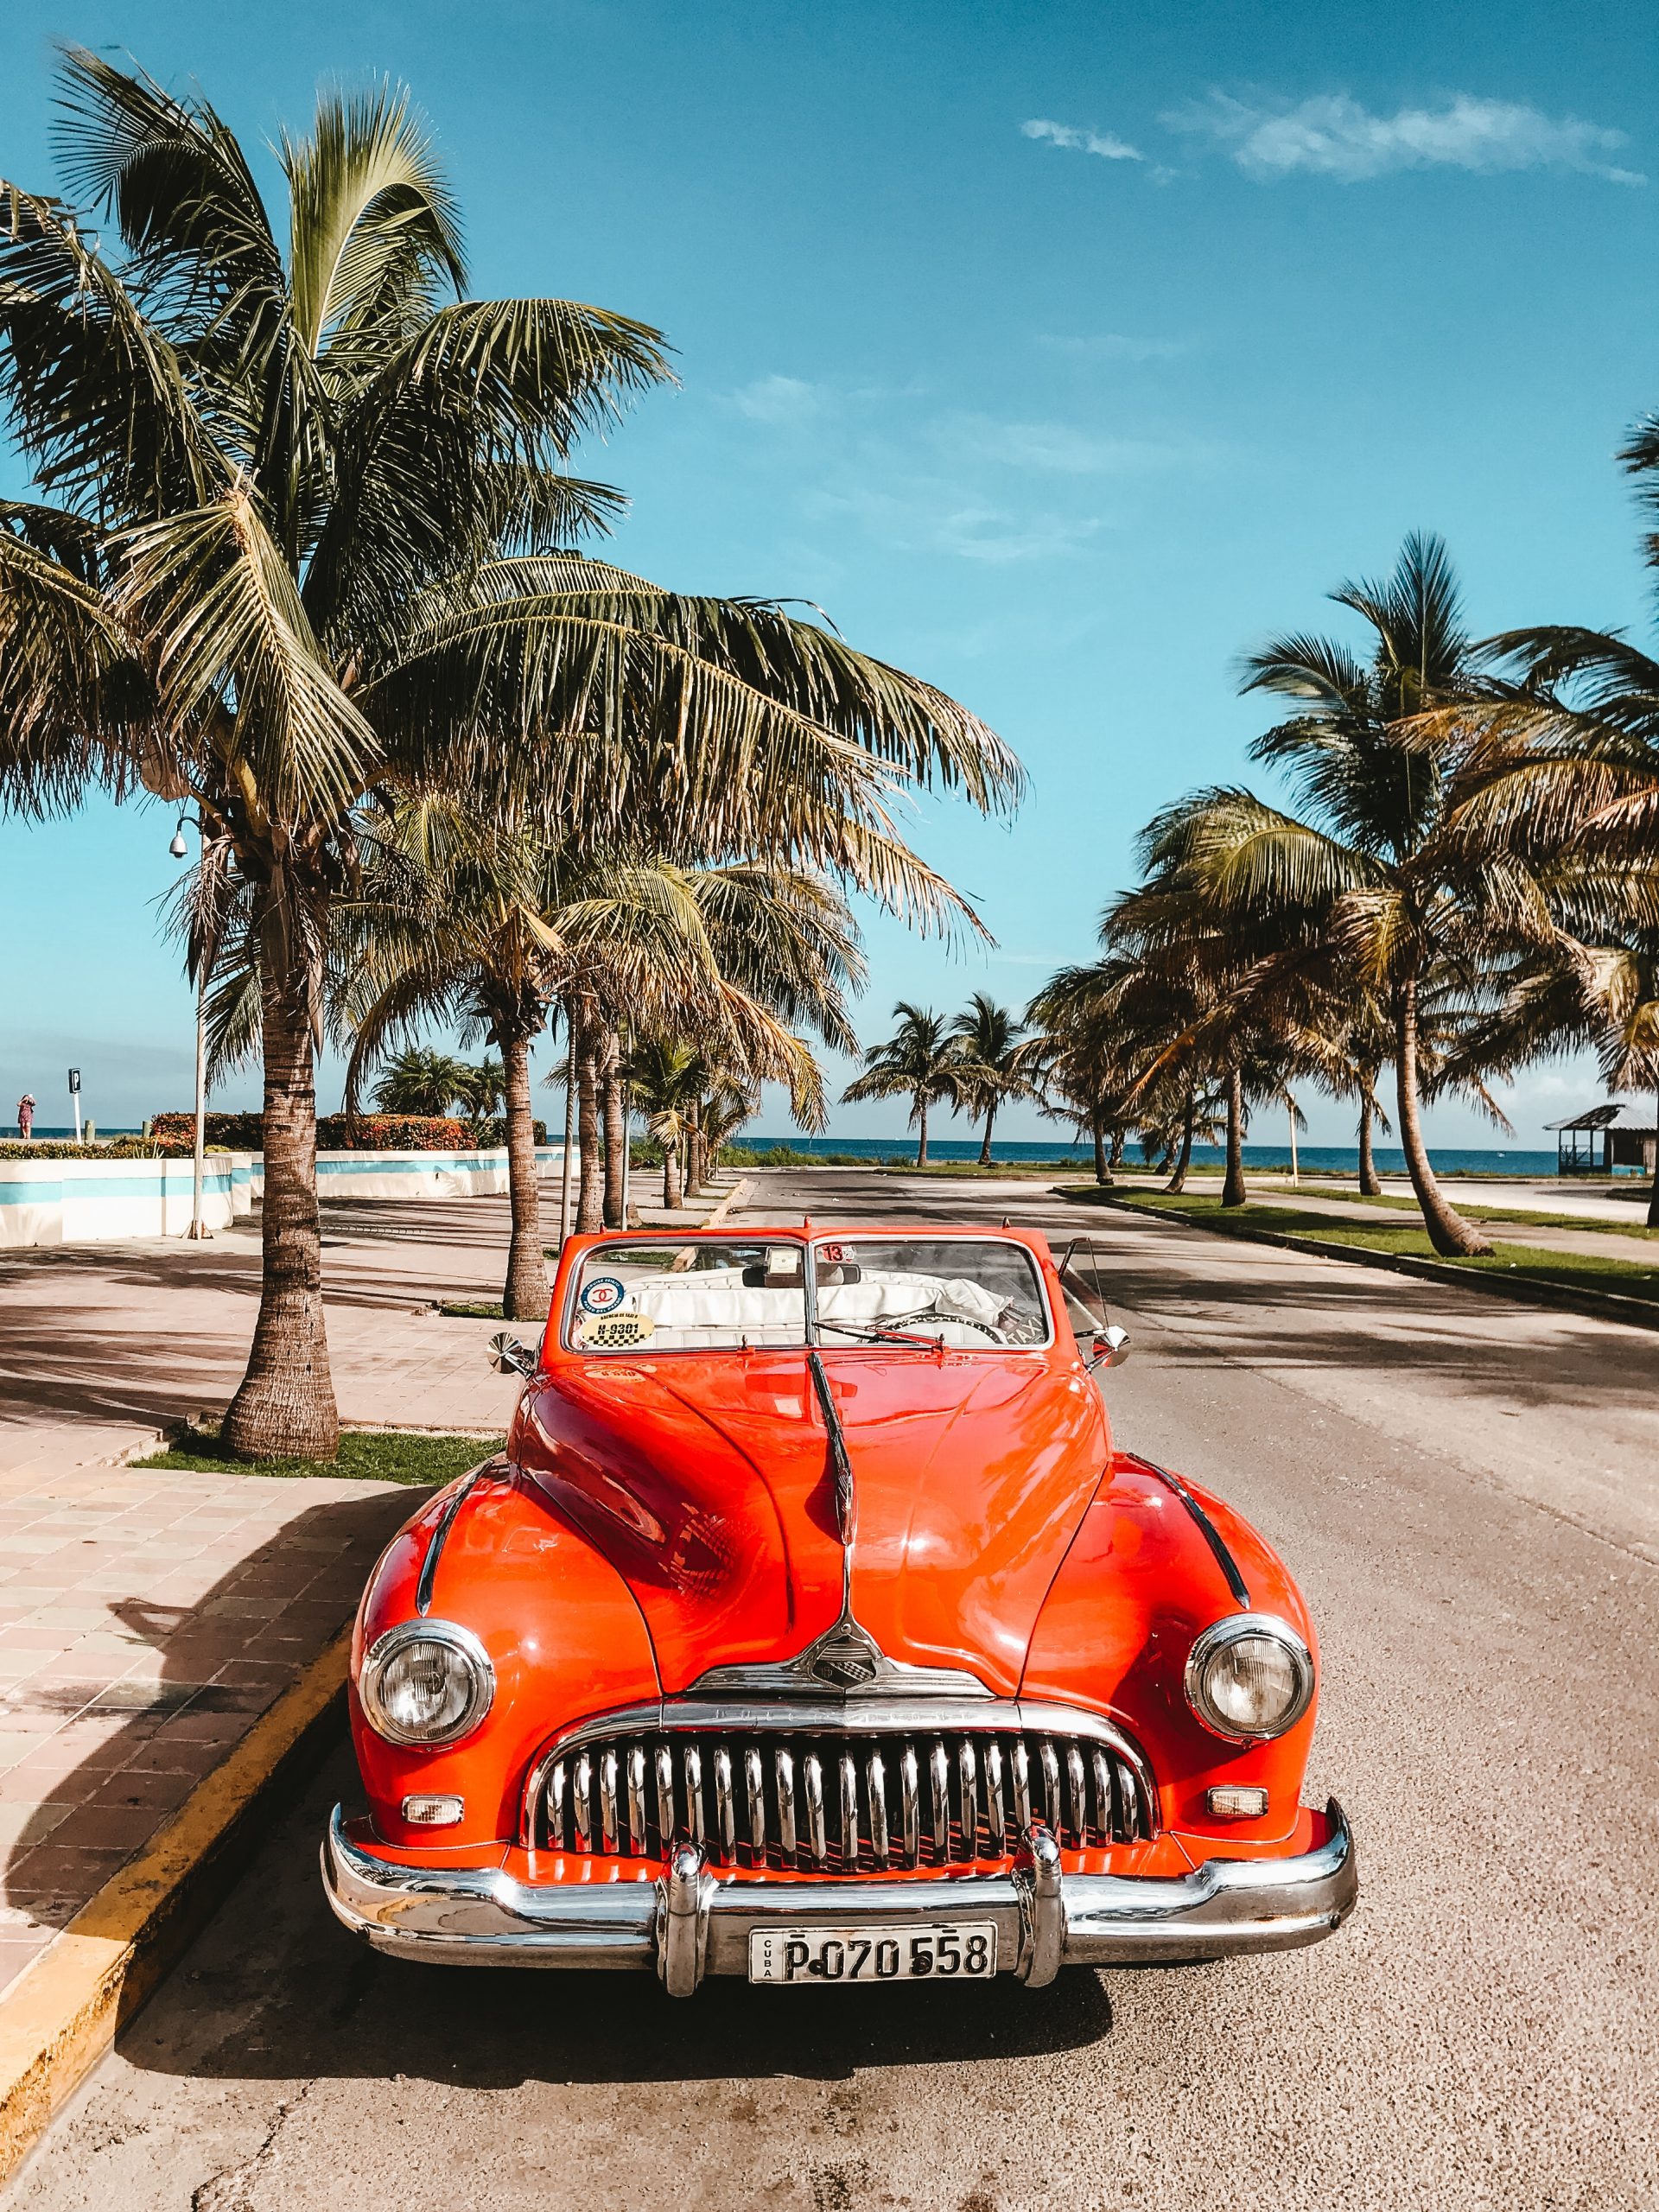 Typical old car in Havana, Cuba - Top 20 Cheapest Places to Travel in 2023 